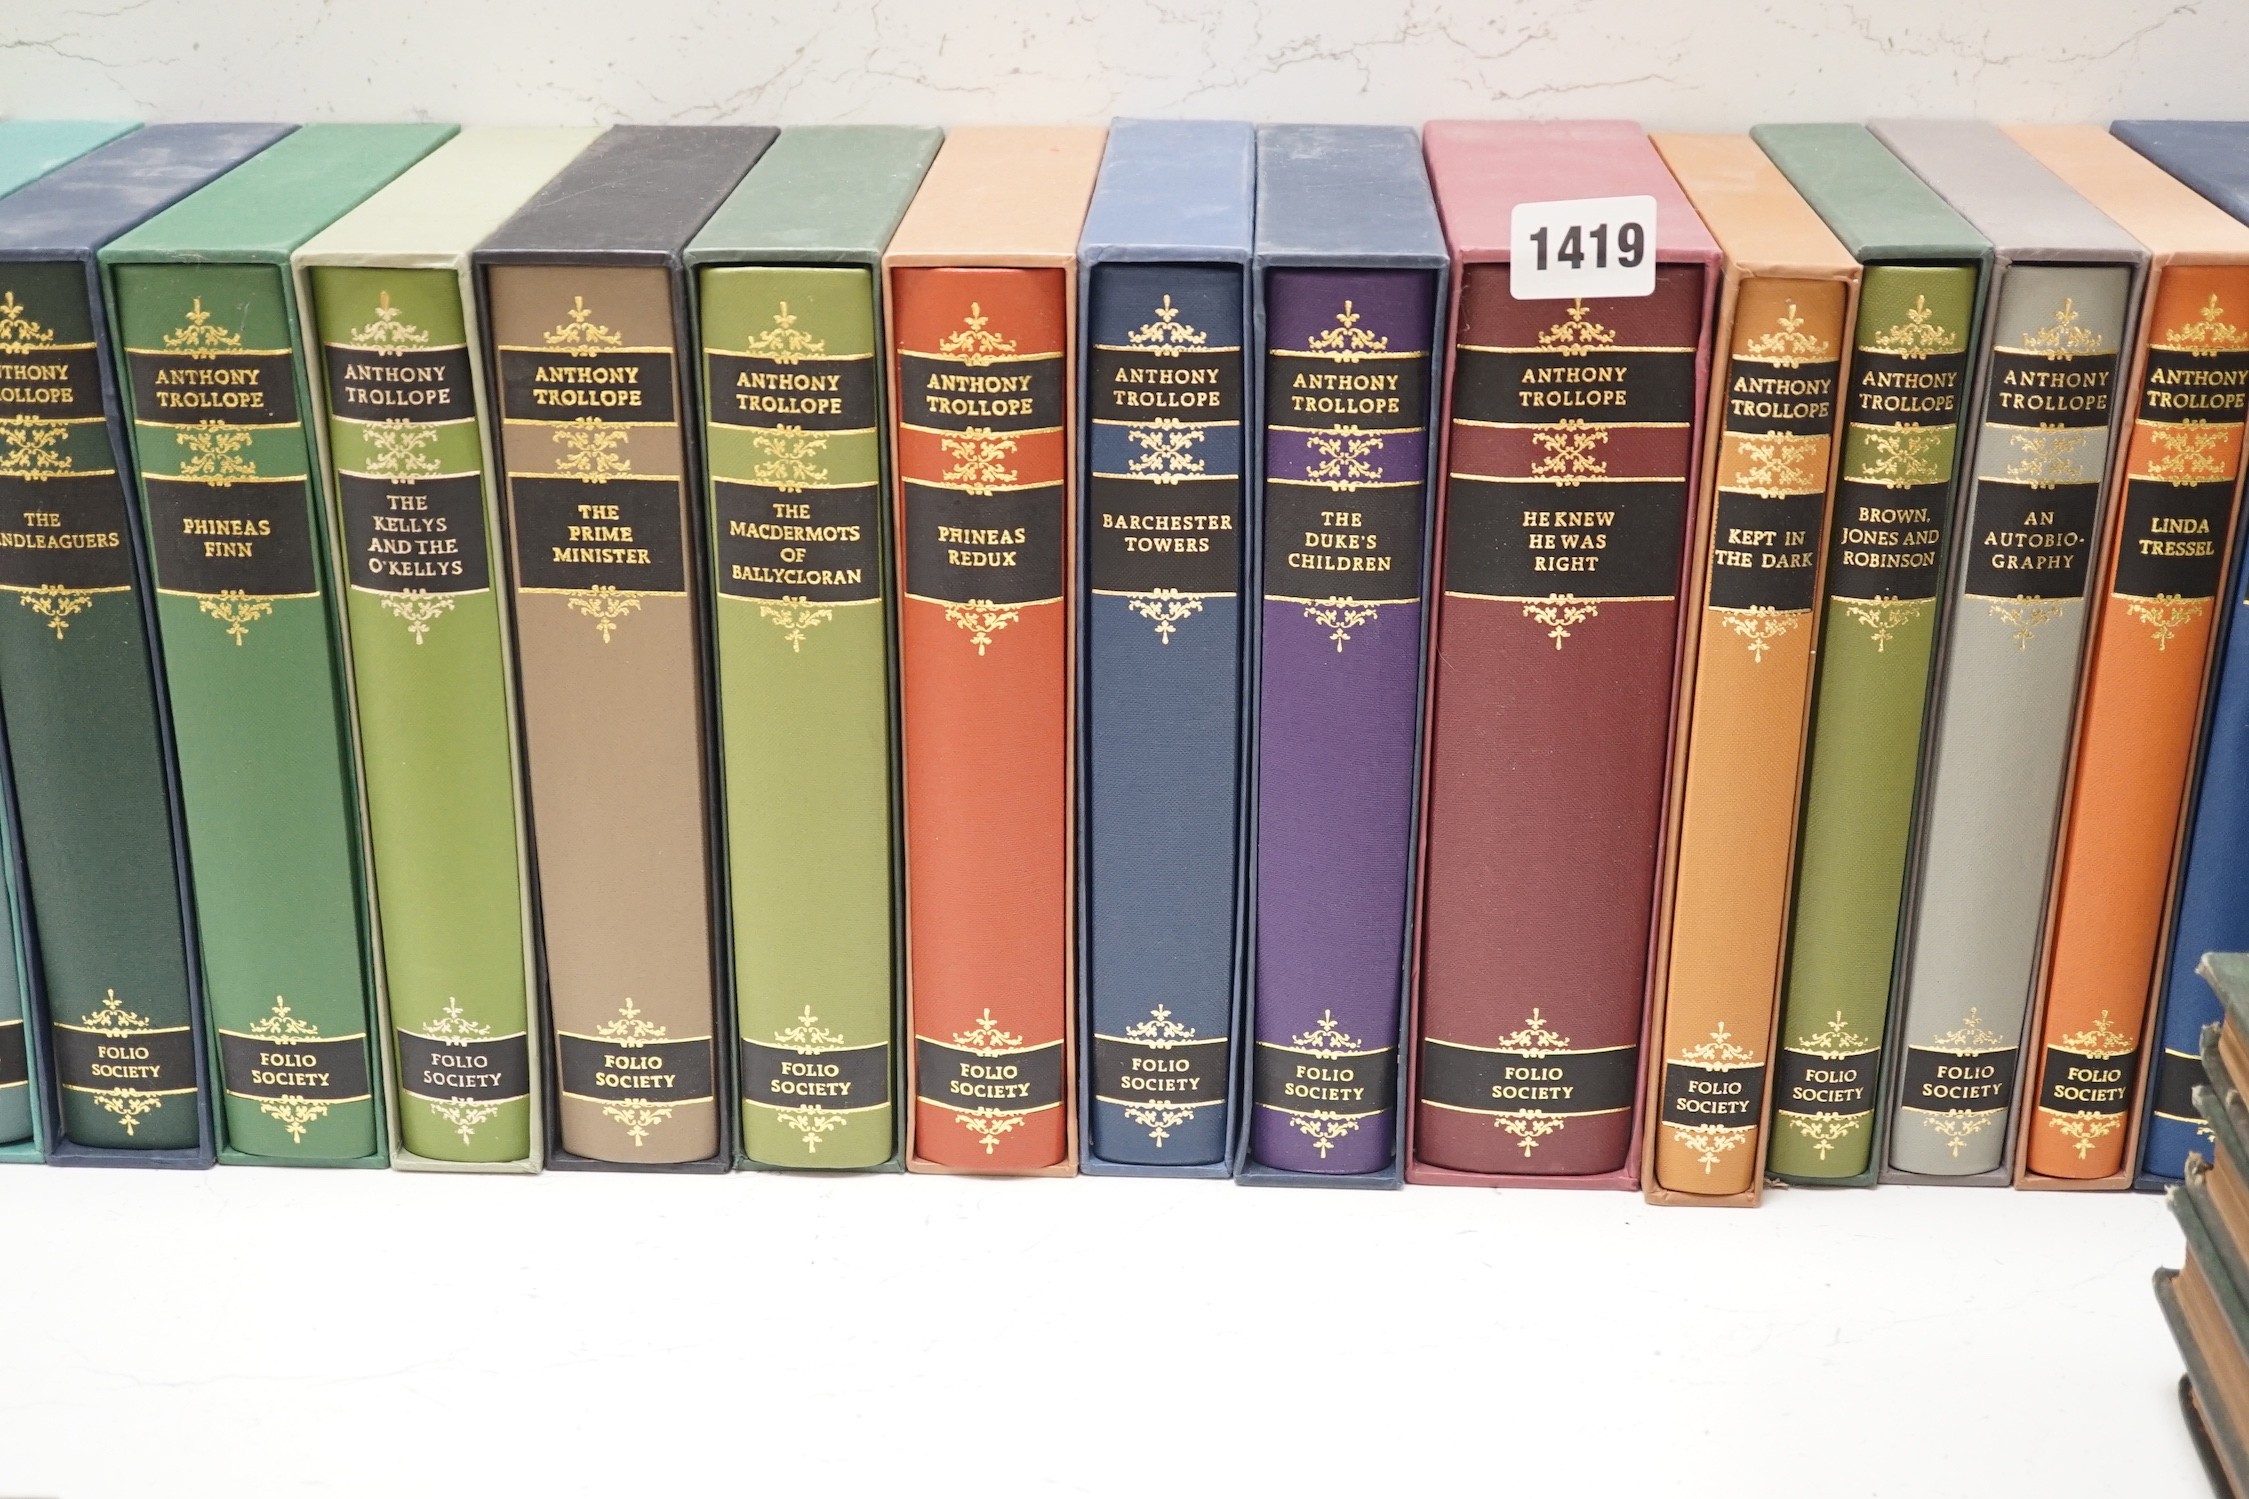 A quantity of Anthony Trollope and Graham Greene novels, together with others